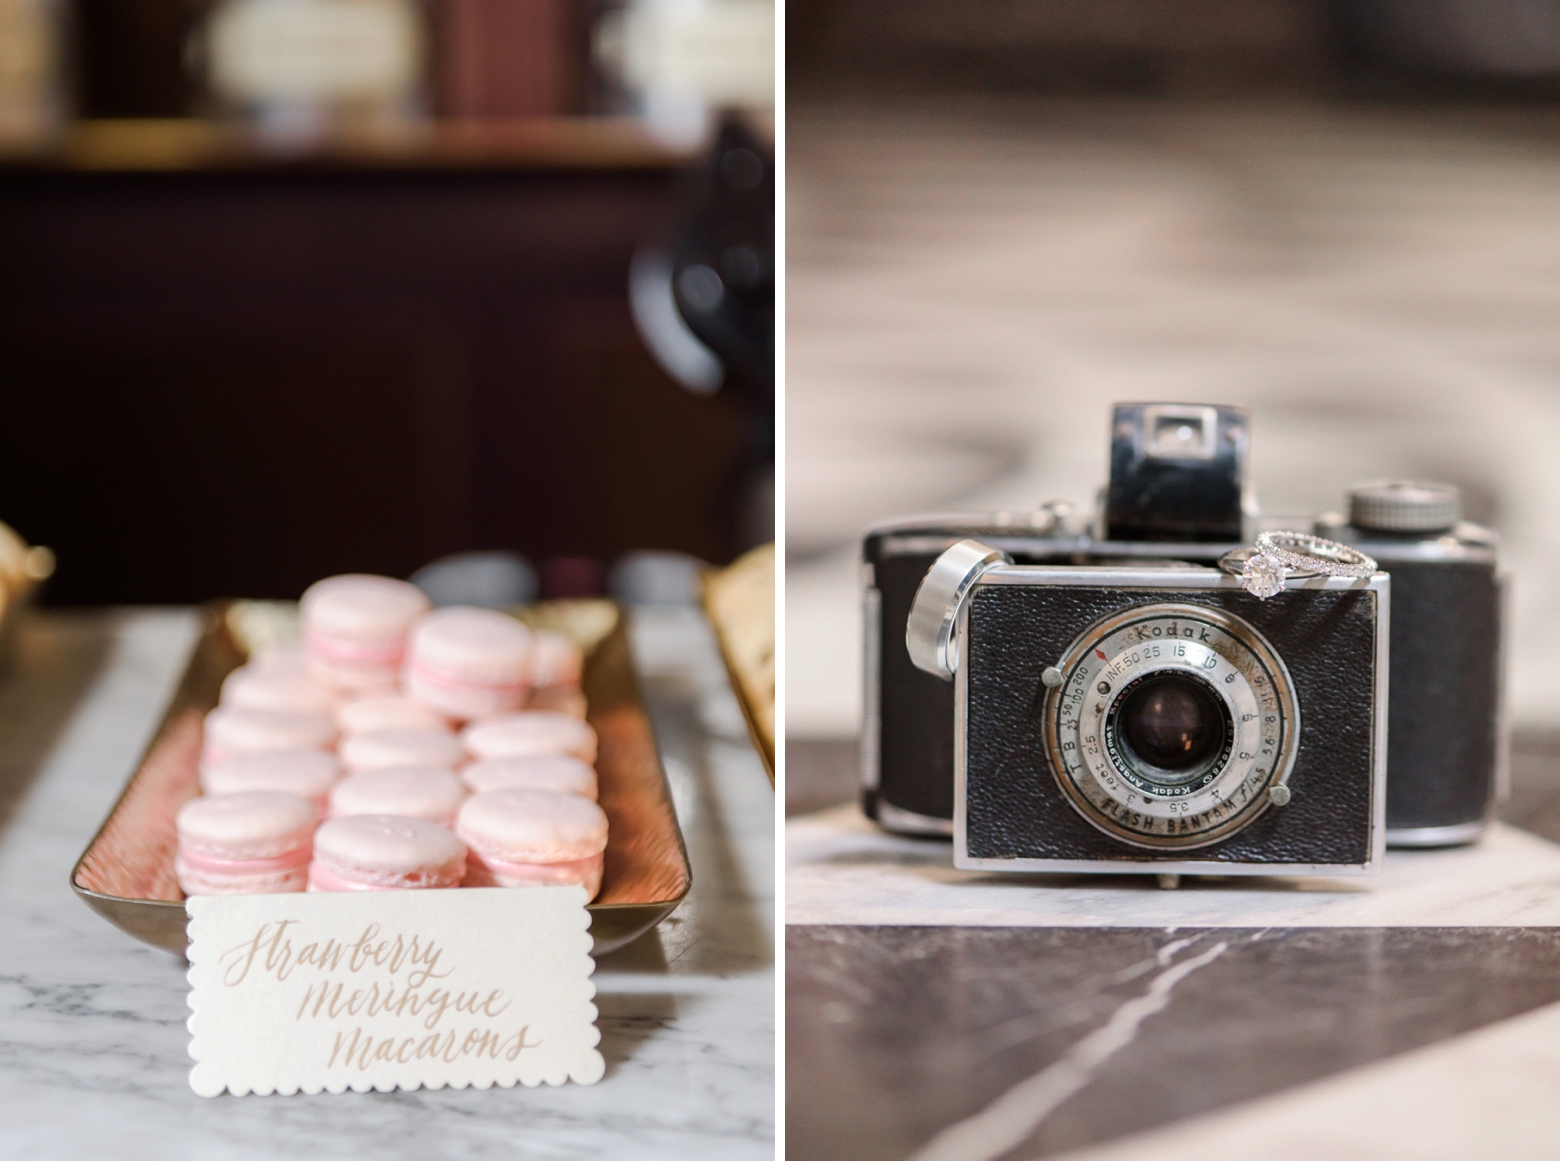 Some pink macarons on the desert table and a photo of the wedding bands on a vintage film camera